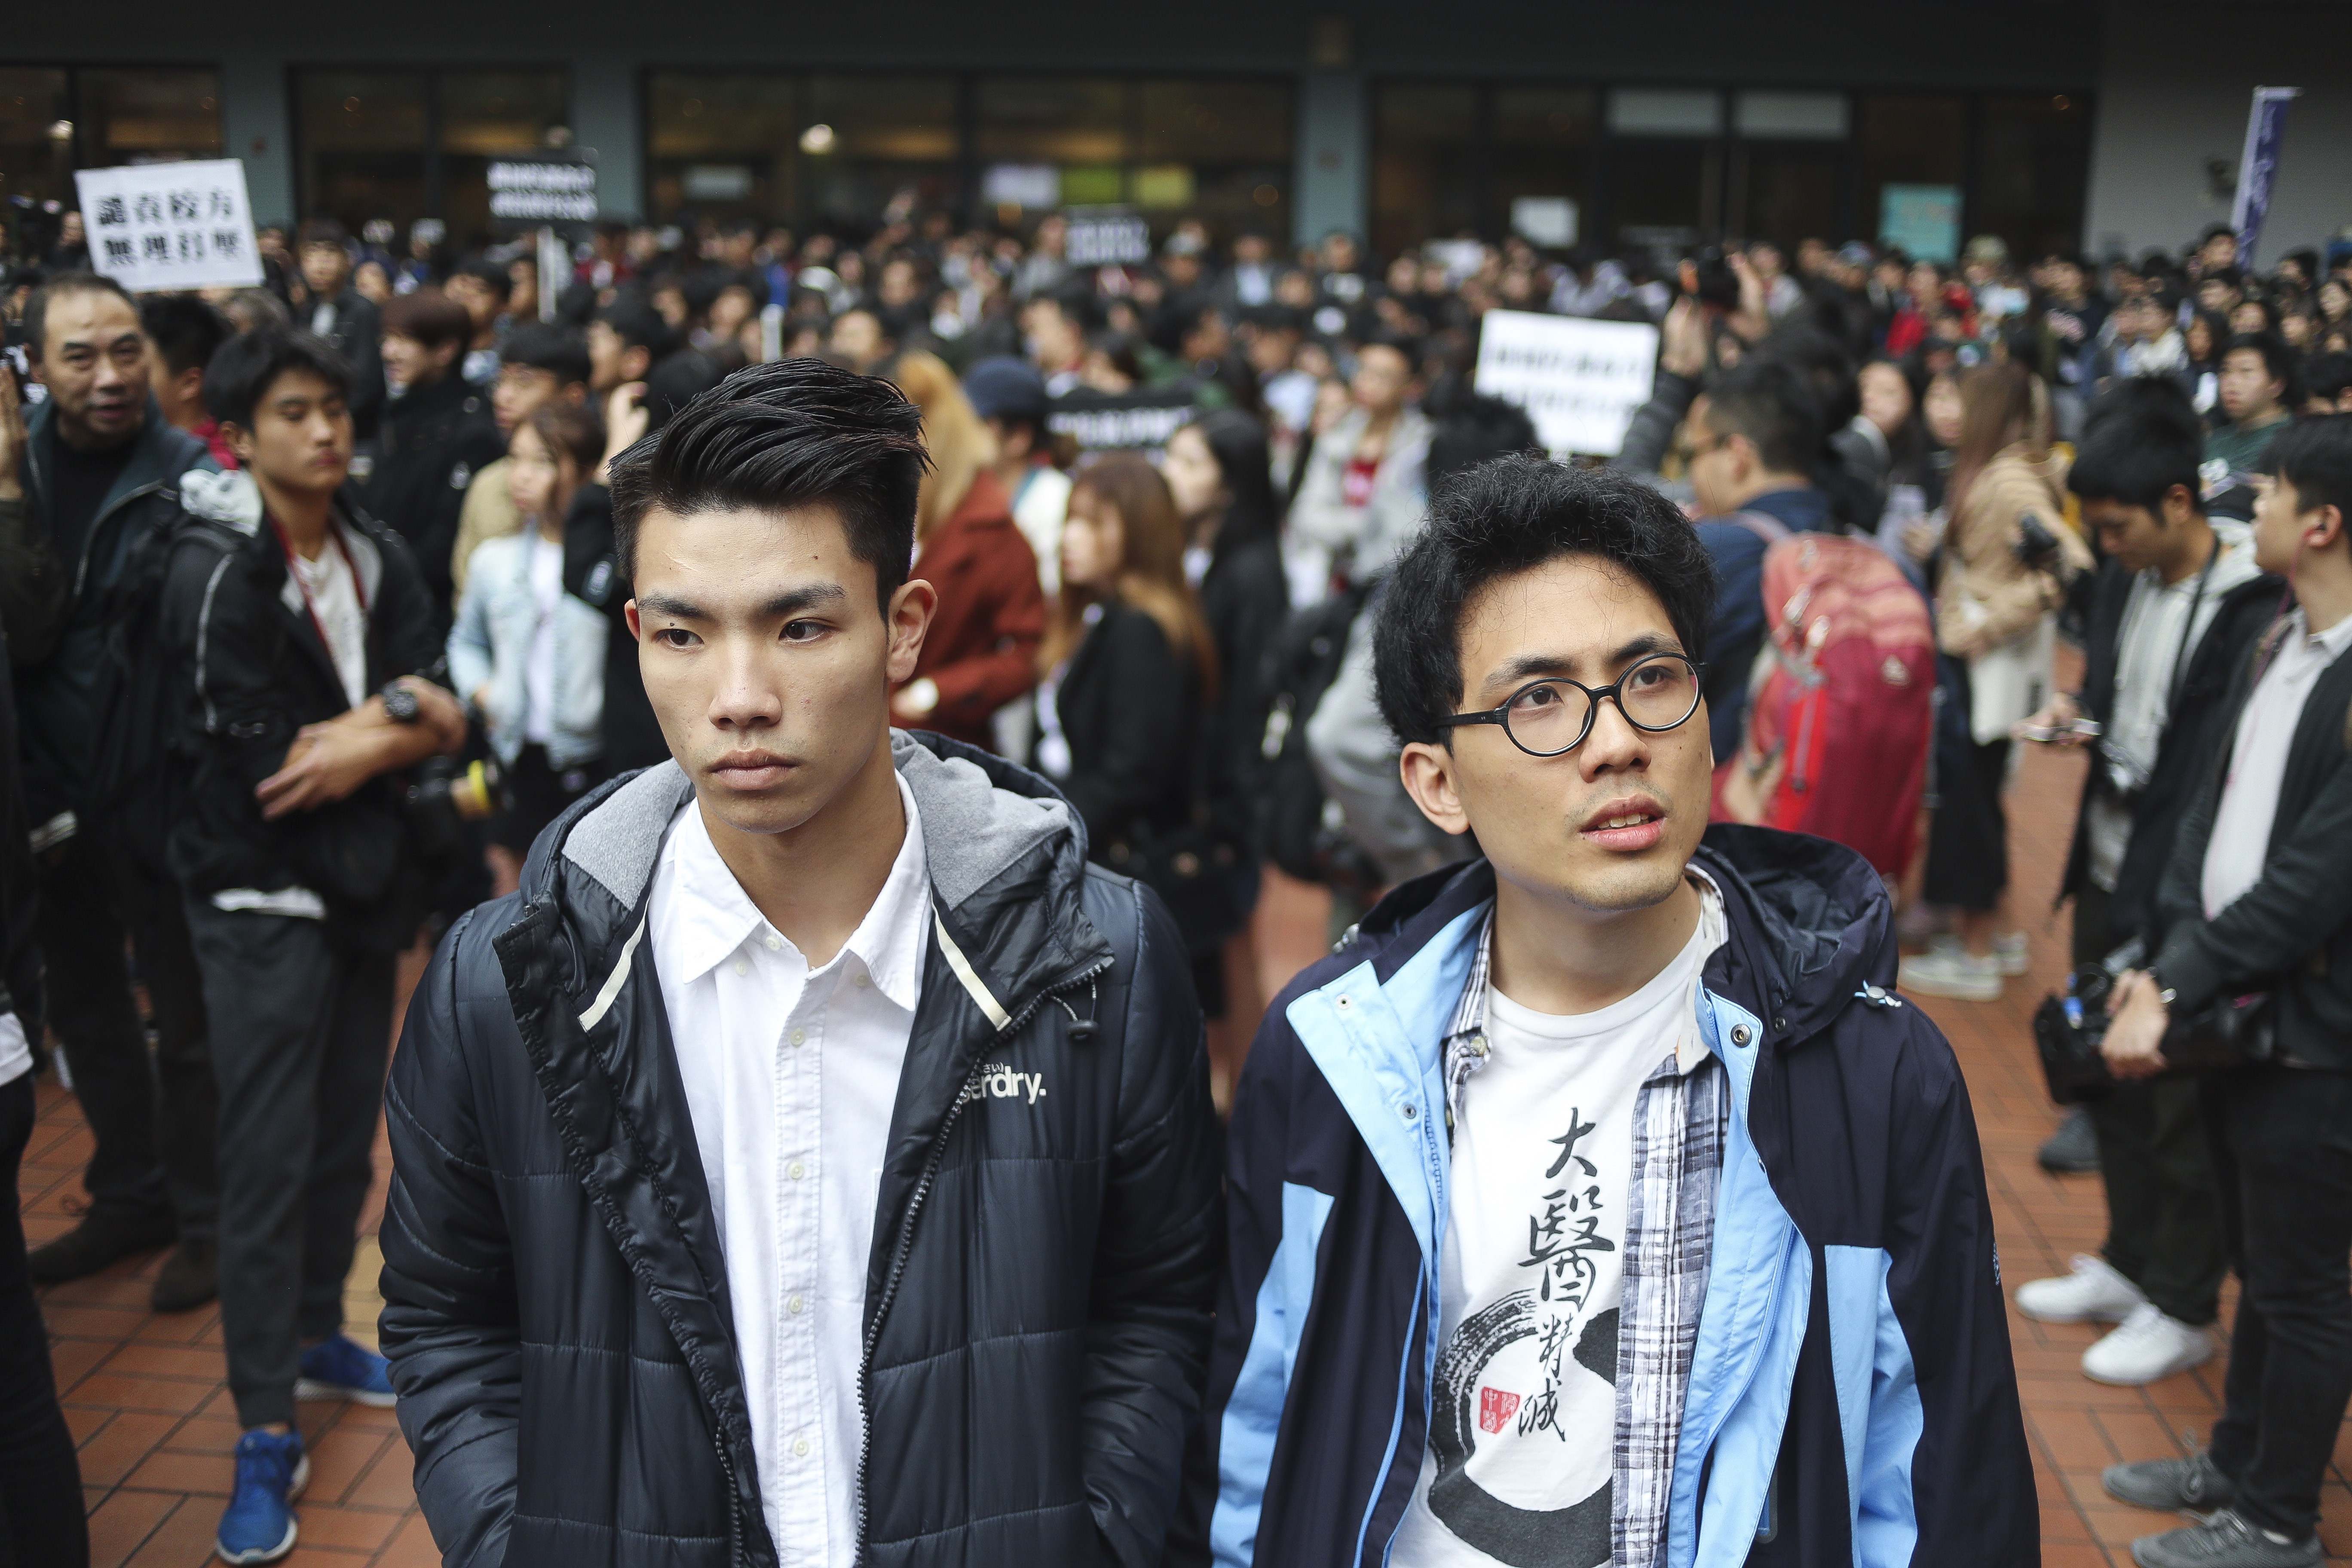 Baptist University student Lau Tsz-kei (left) did not protest the school’s disciplinary decision, but Andrew Chan Lok-hang (right) did. His appeal was rejected. Photo: Winson Wong